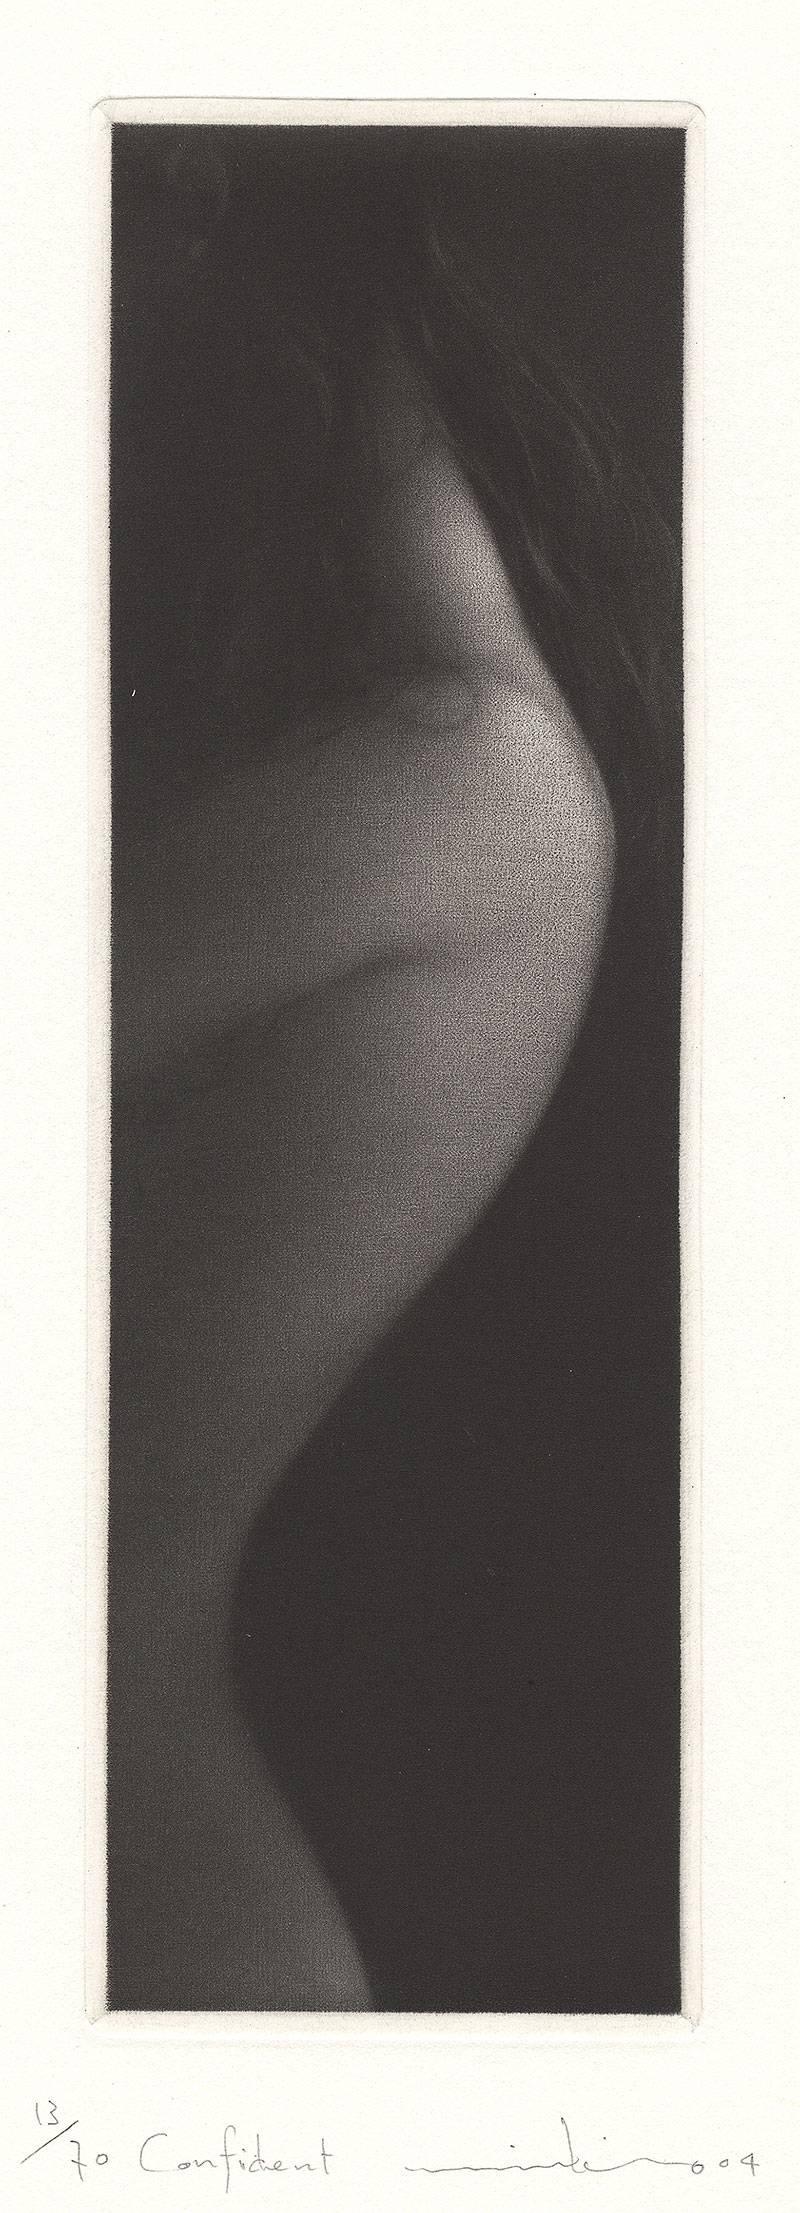 Mikio Watanabe Figurative Print - Confident (profile of young nude girl with wisps of hair on her neck)